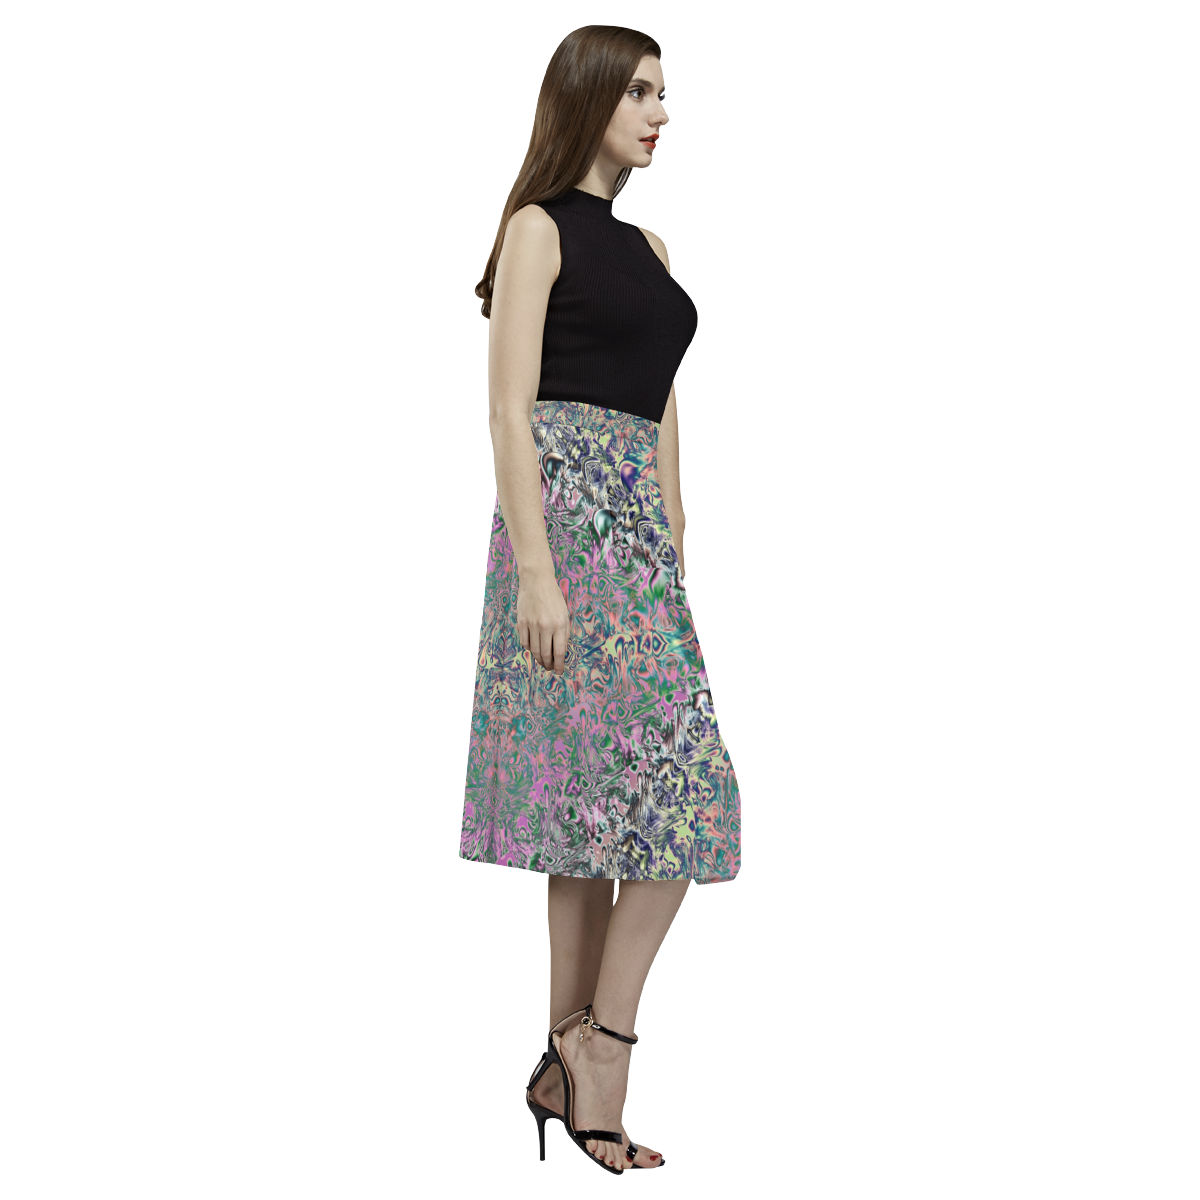 Watercolor Holograms Fractal Abstract Aoede Crepe Skirt (Model D16)